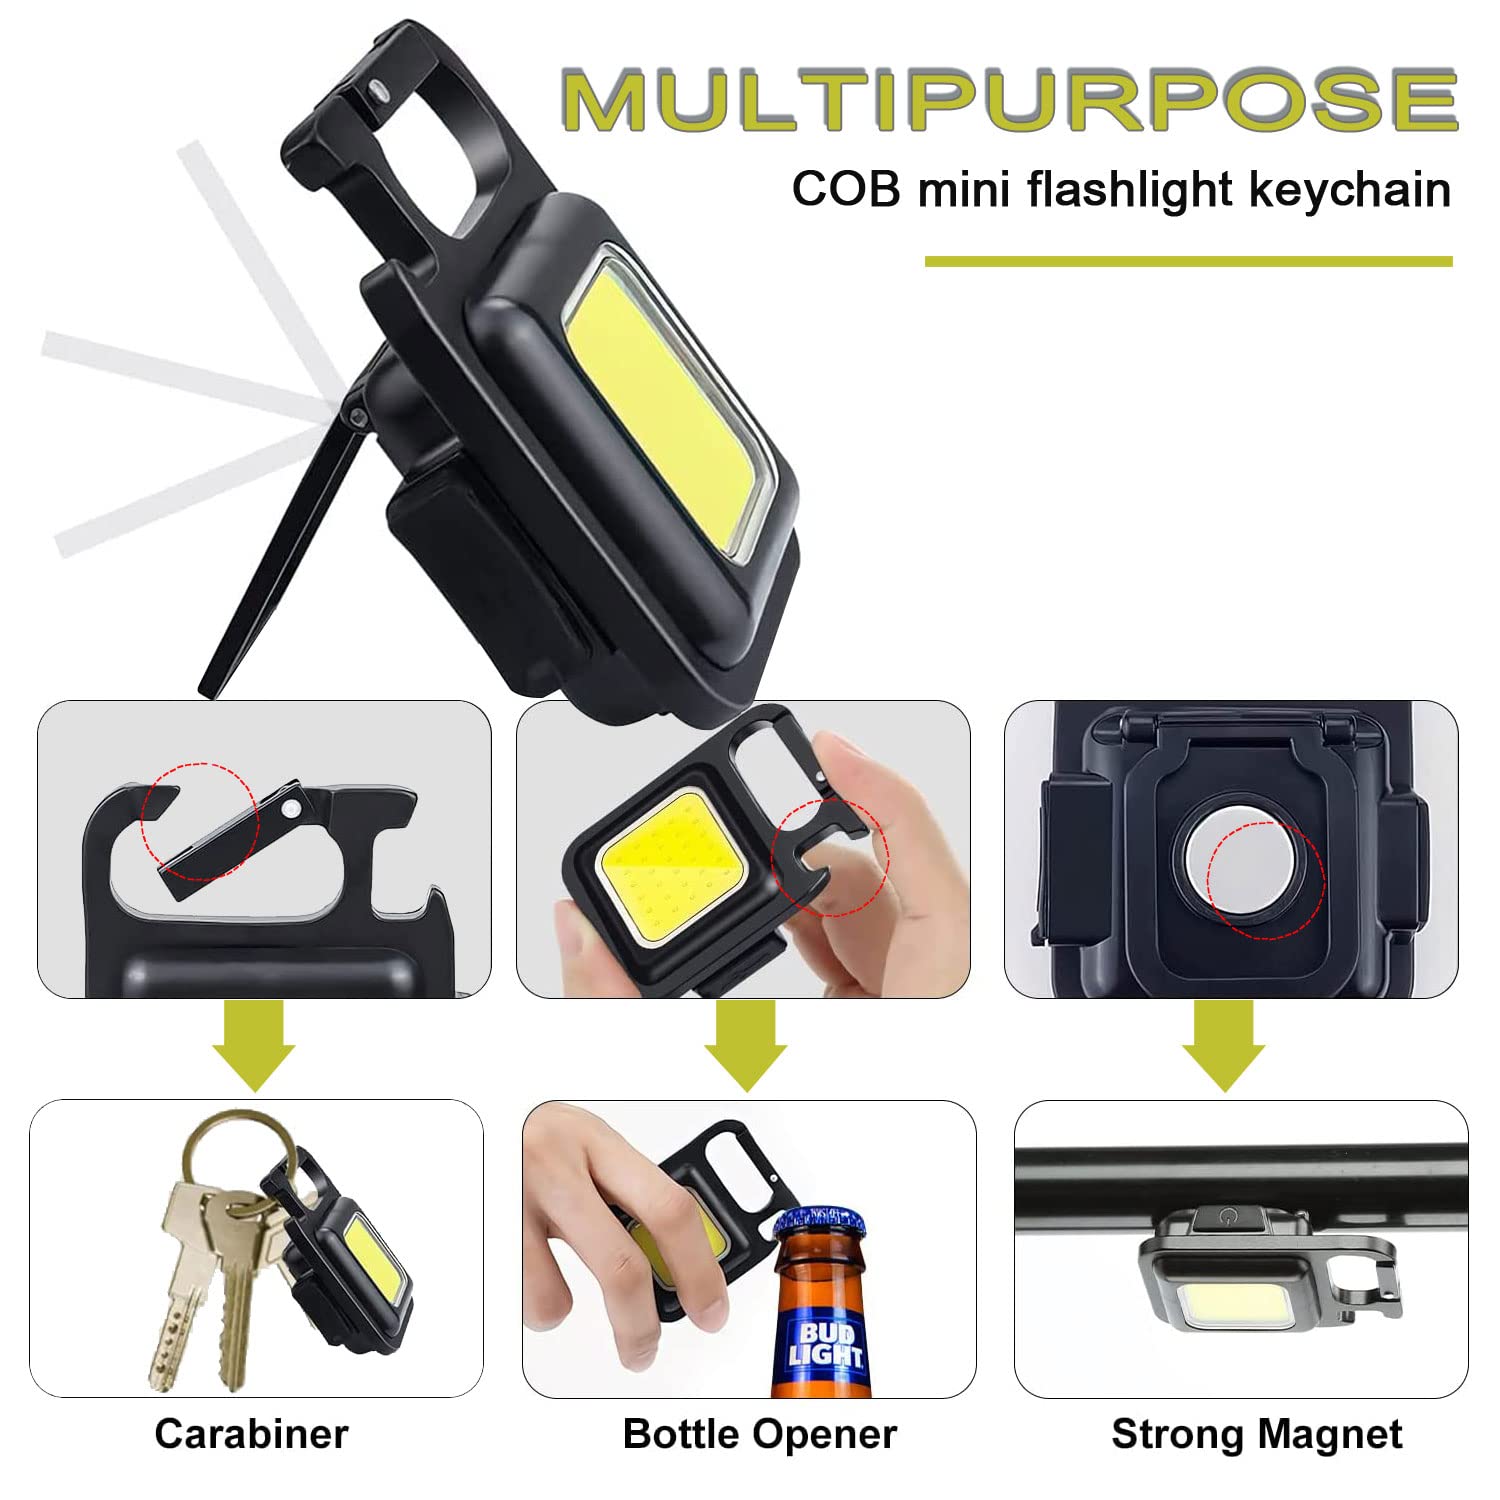 Keychain Light,Mini Cob Flashlight,Super Bright Light (Max to 500Lumens)Rechargeable Small Emergency Light,4 Modes Portable Pocket Light with Folding Bracket Bottle Opener for Fishing ,Camping,Walking